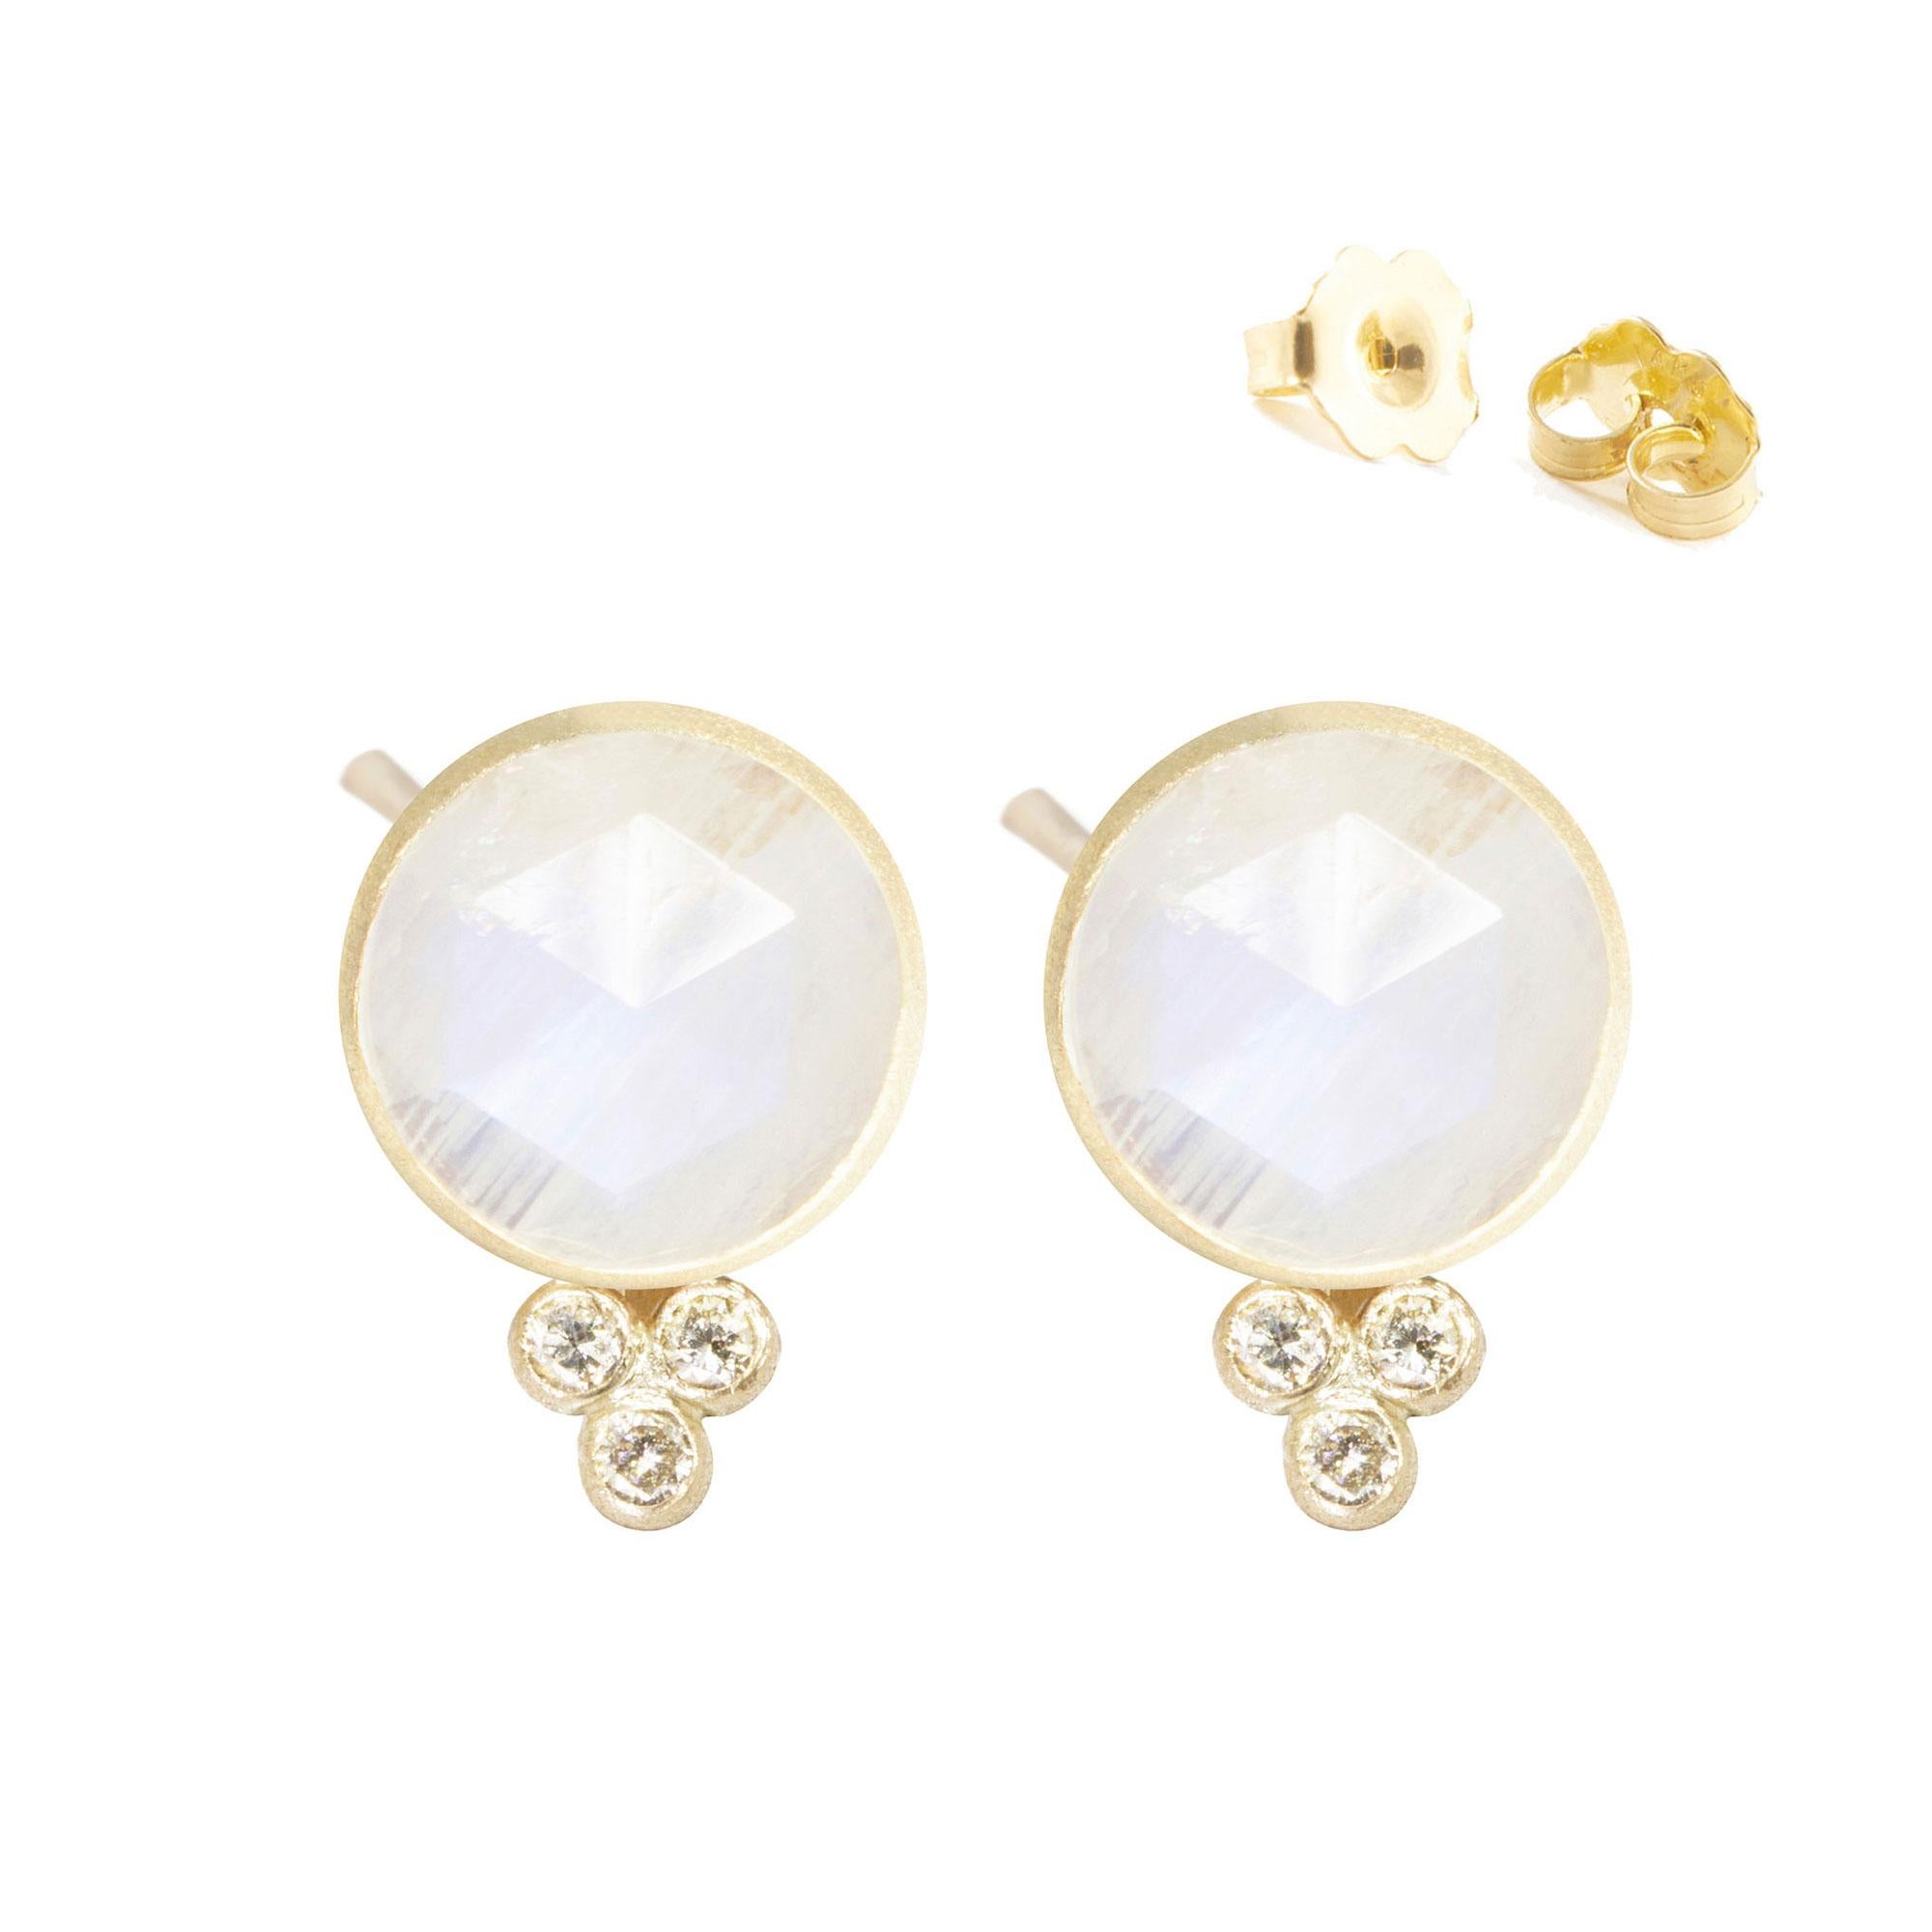 A Nina Nguyen classic: Our Chloe Gold Studs are designed with hand-faceted moonstone rimmed in gold, and accented with diamonds for some extra sparkle.

Nina Nguyen Design's patent-pending earrings have an element on the back of the stud or charm to